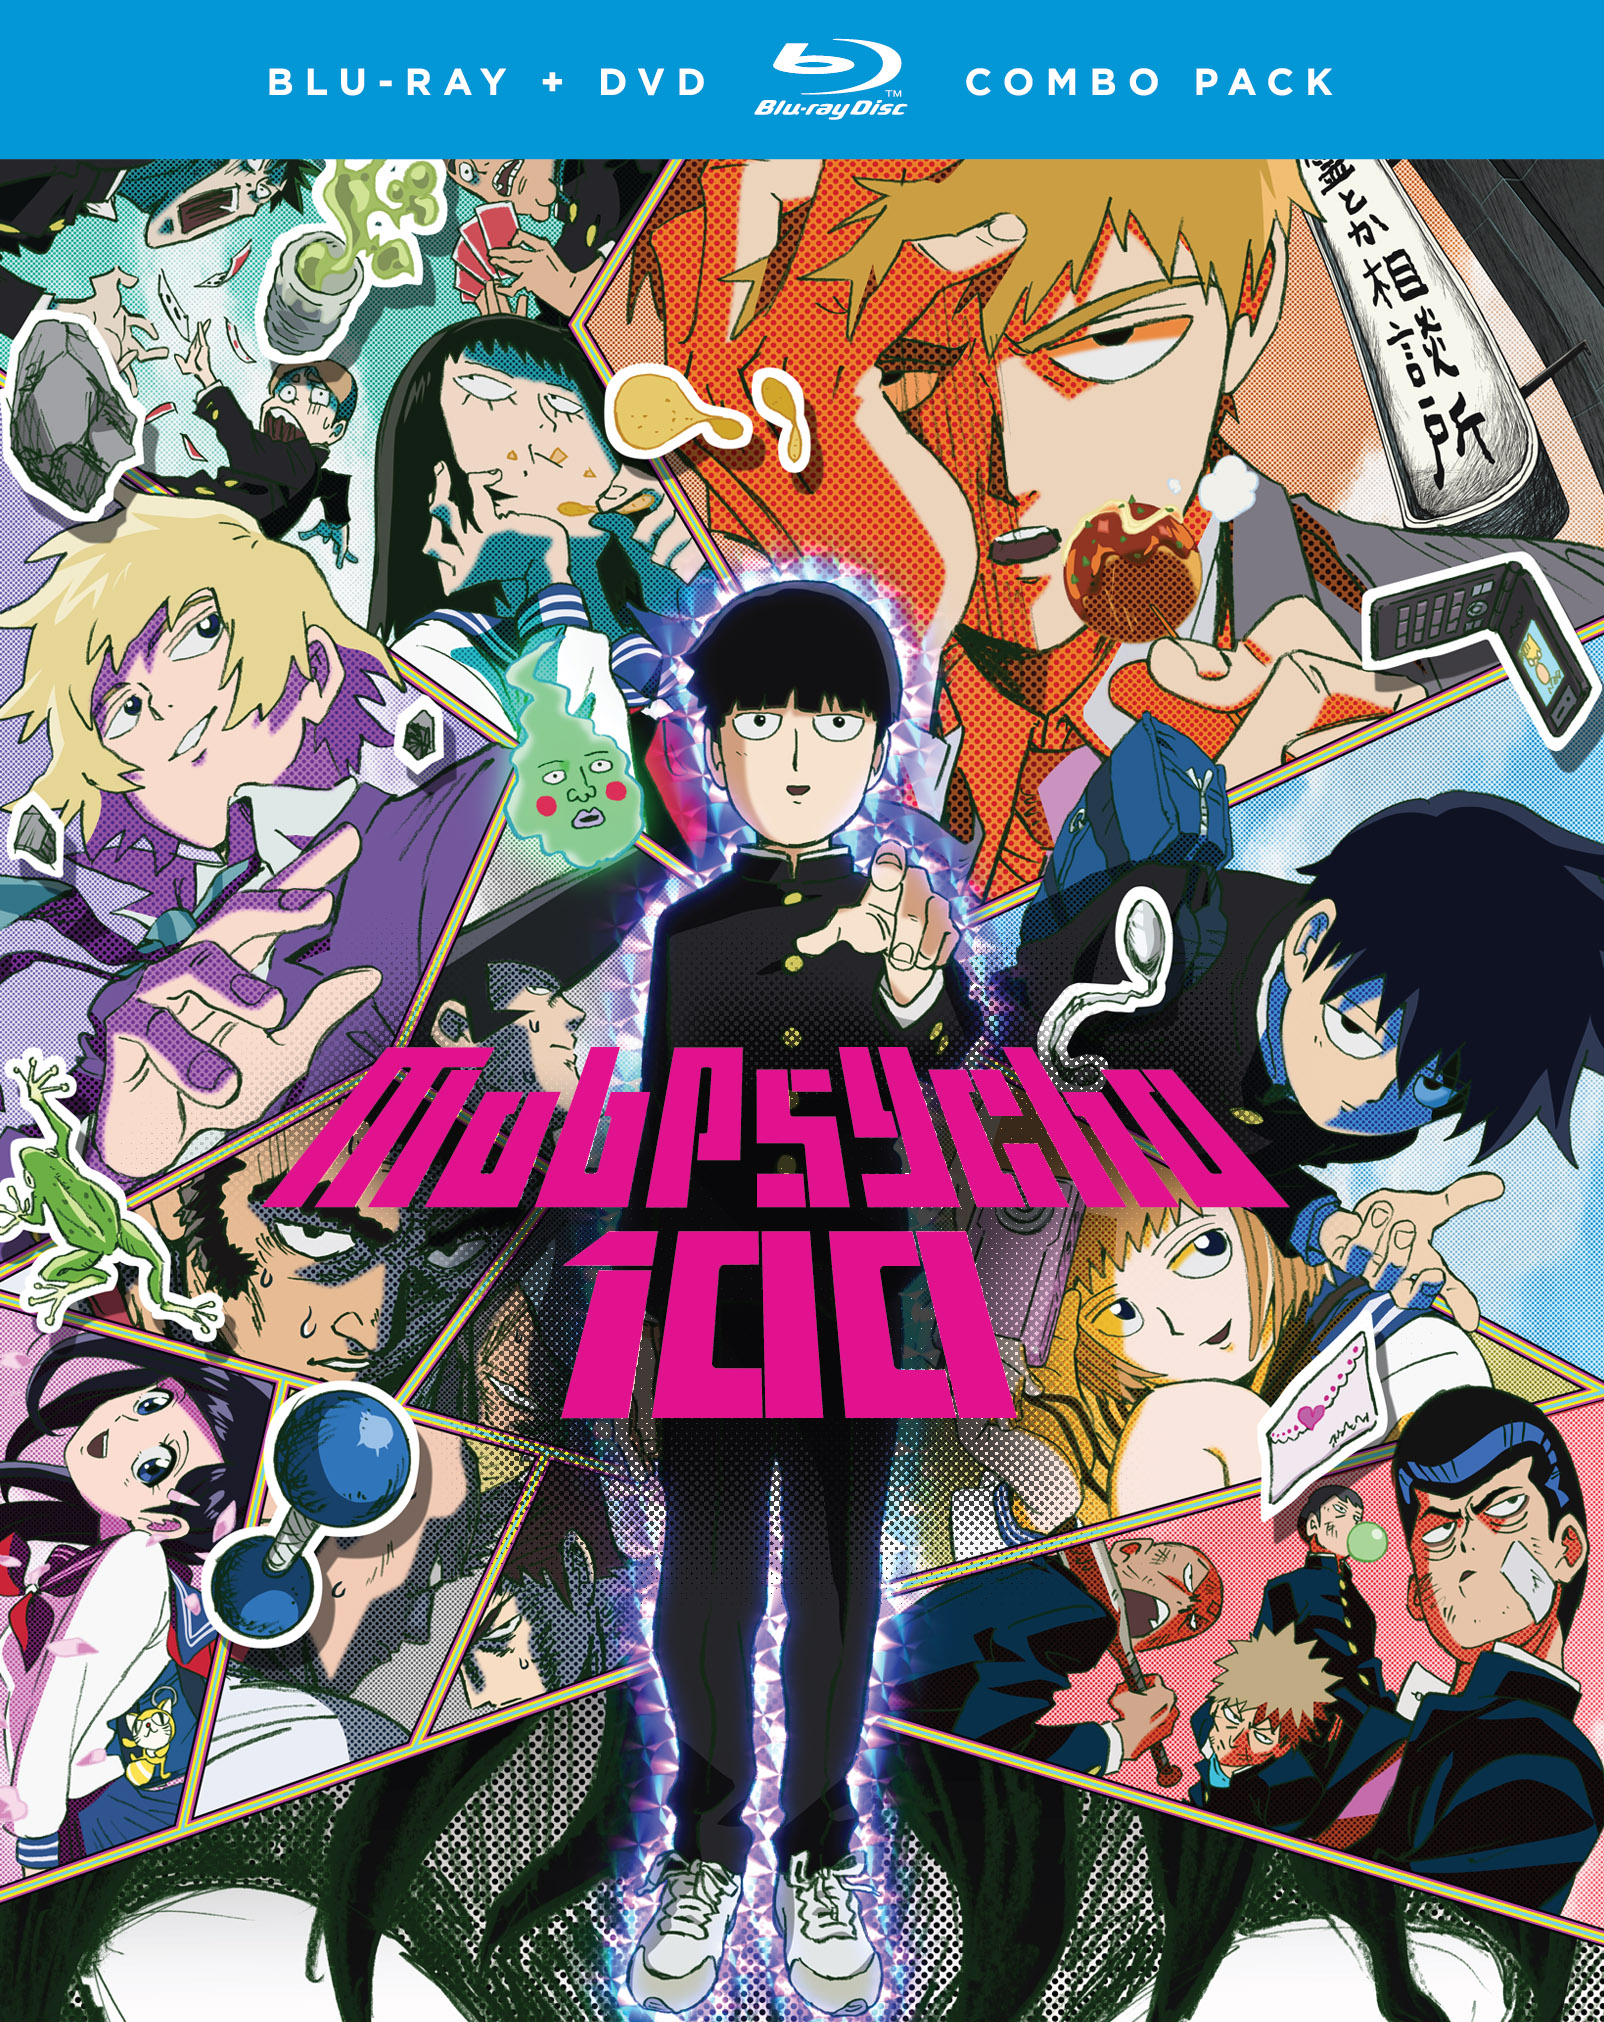 Mob Psycho 100: The Complete Series [Blu-ray/DVD] - Best Buy